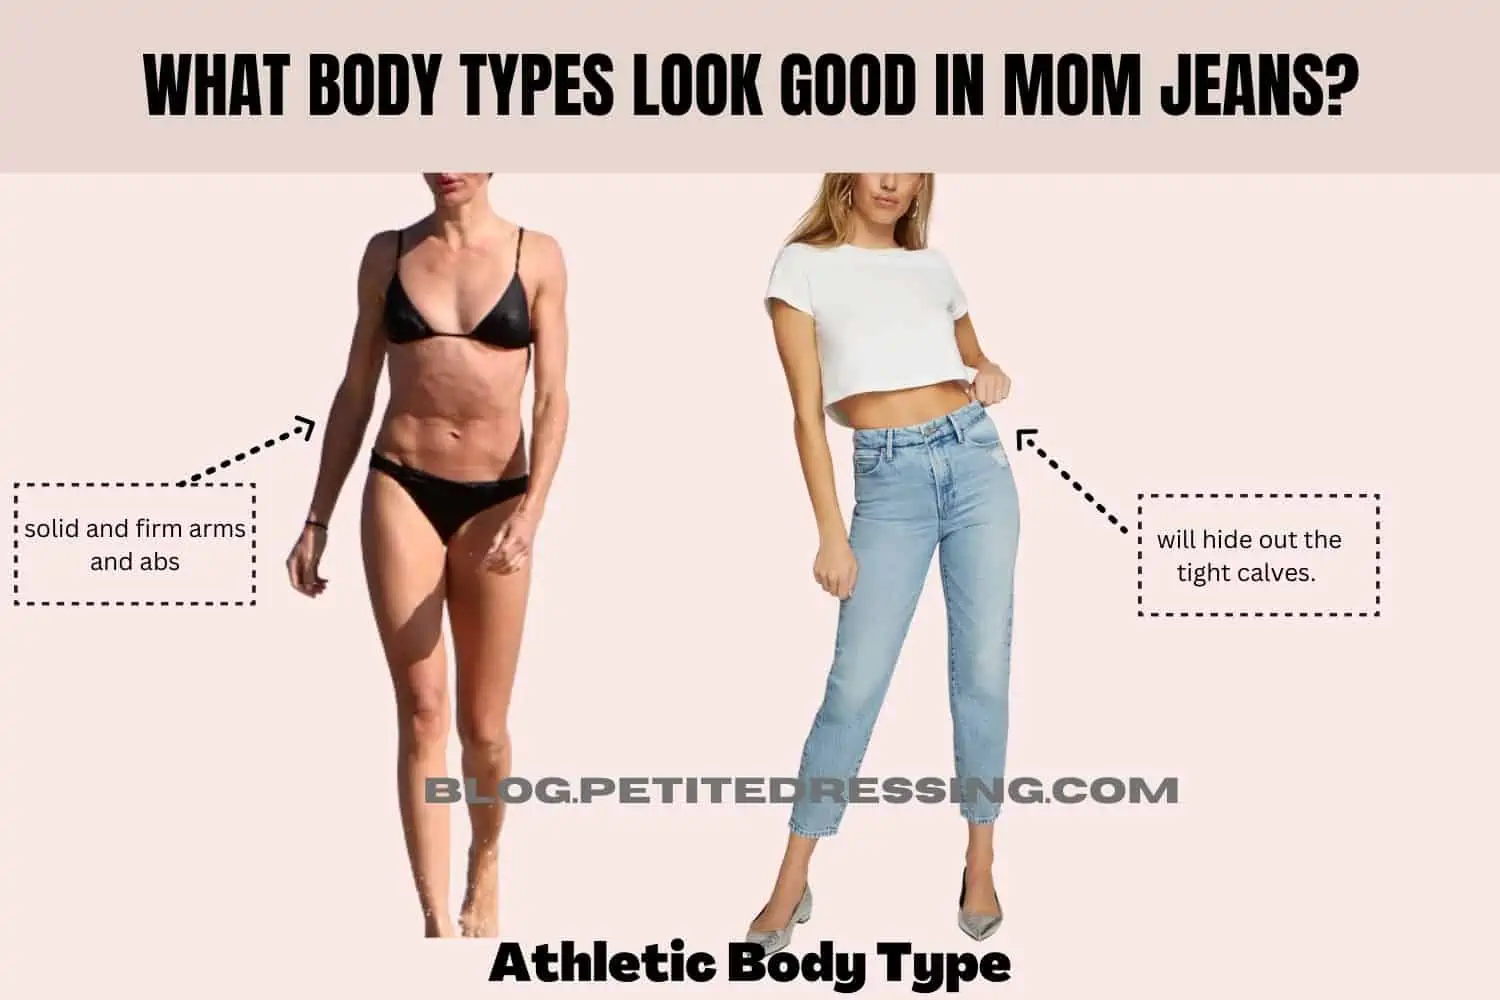 What body types look good in Mom jeans? - Petite Dressing